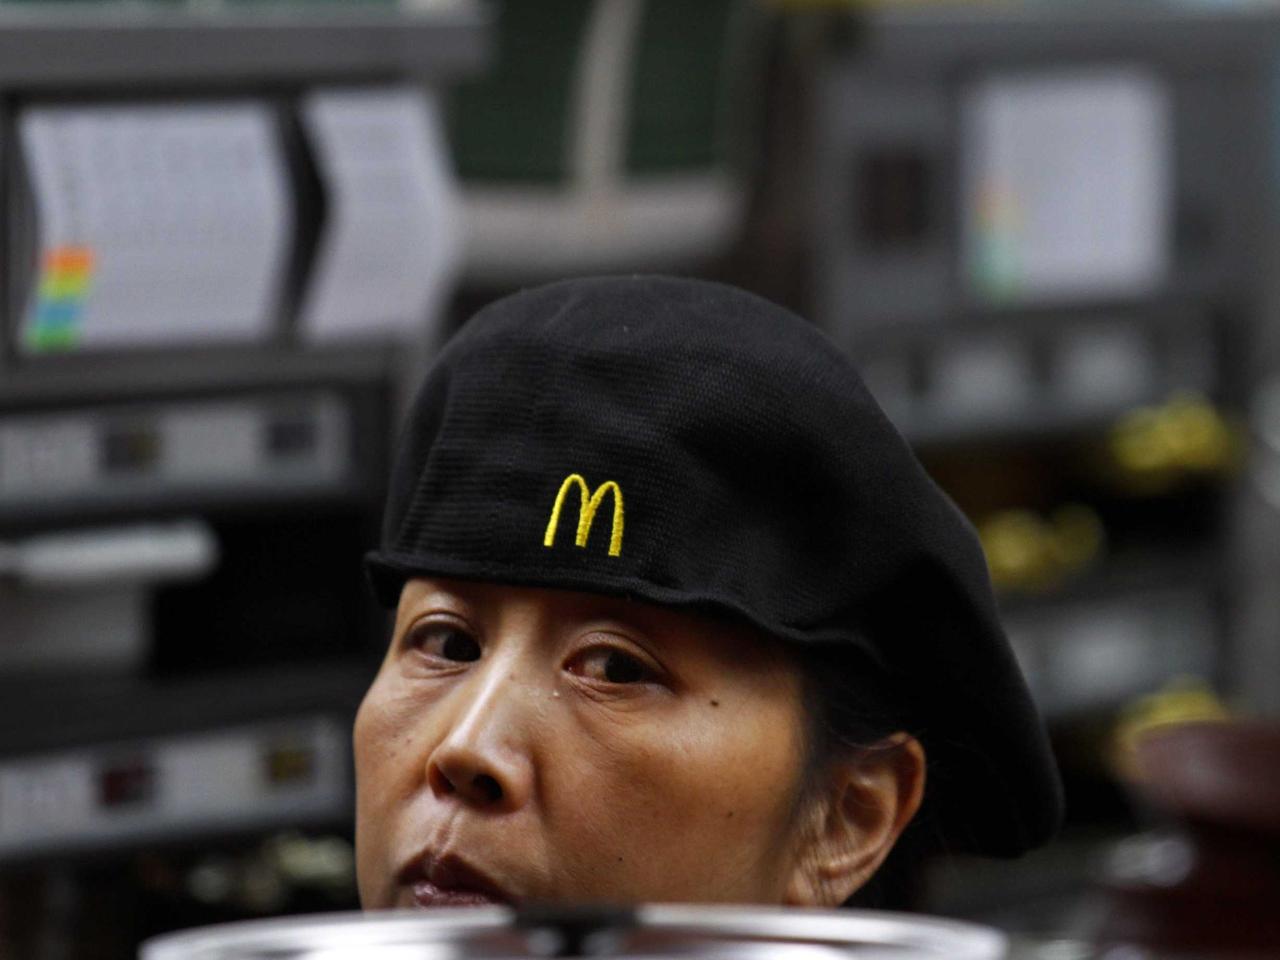 mcdonalds-restaurants-across-the-us-are-shutting-down-for-a-day-without-immigrants-protest